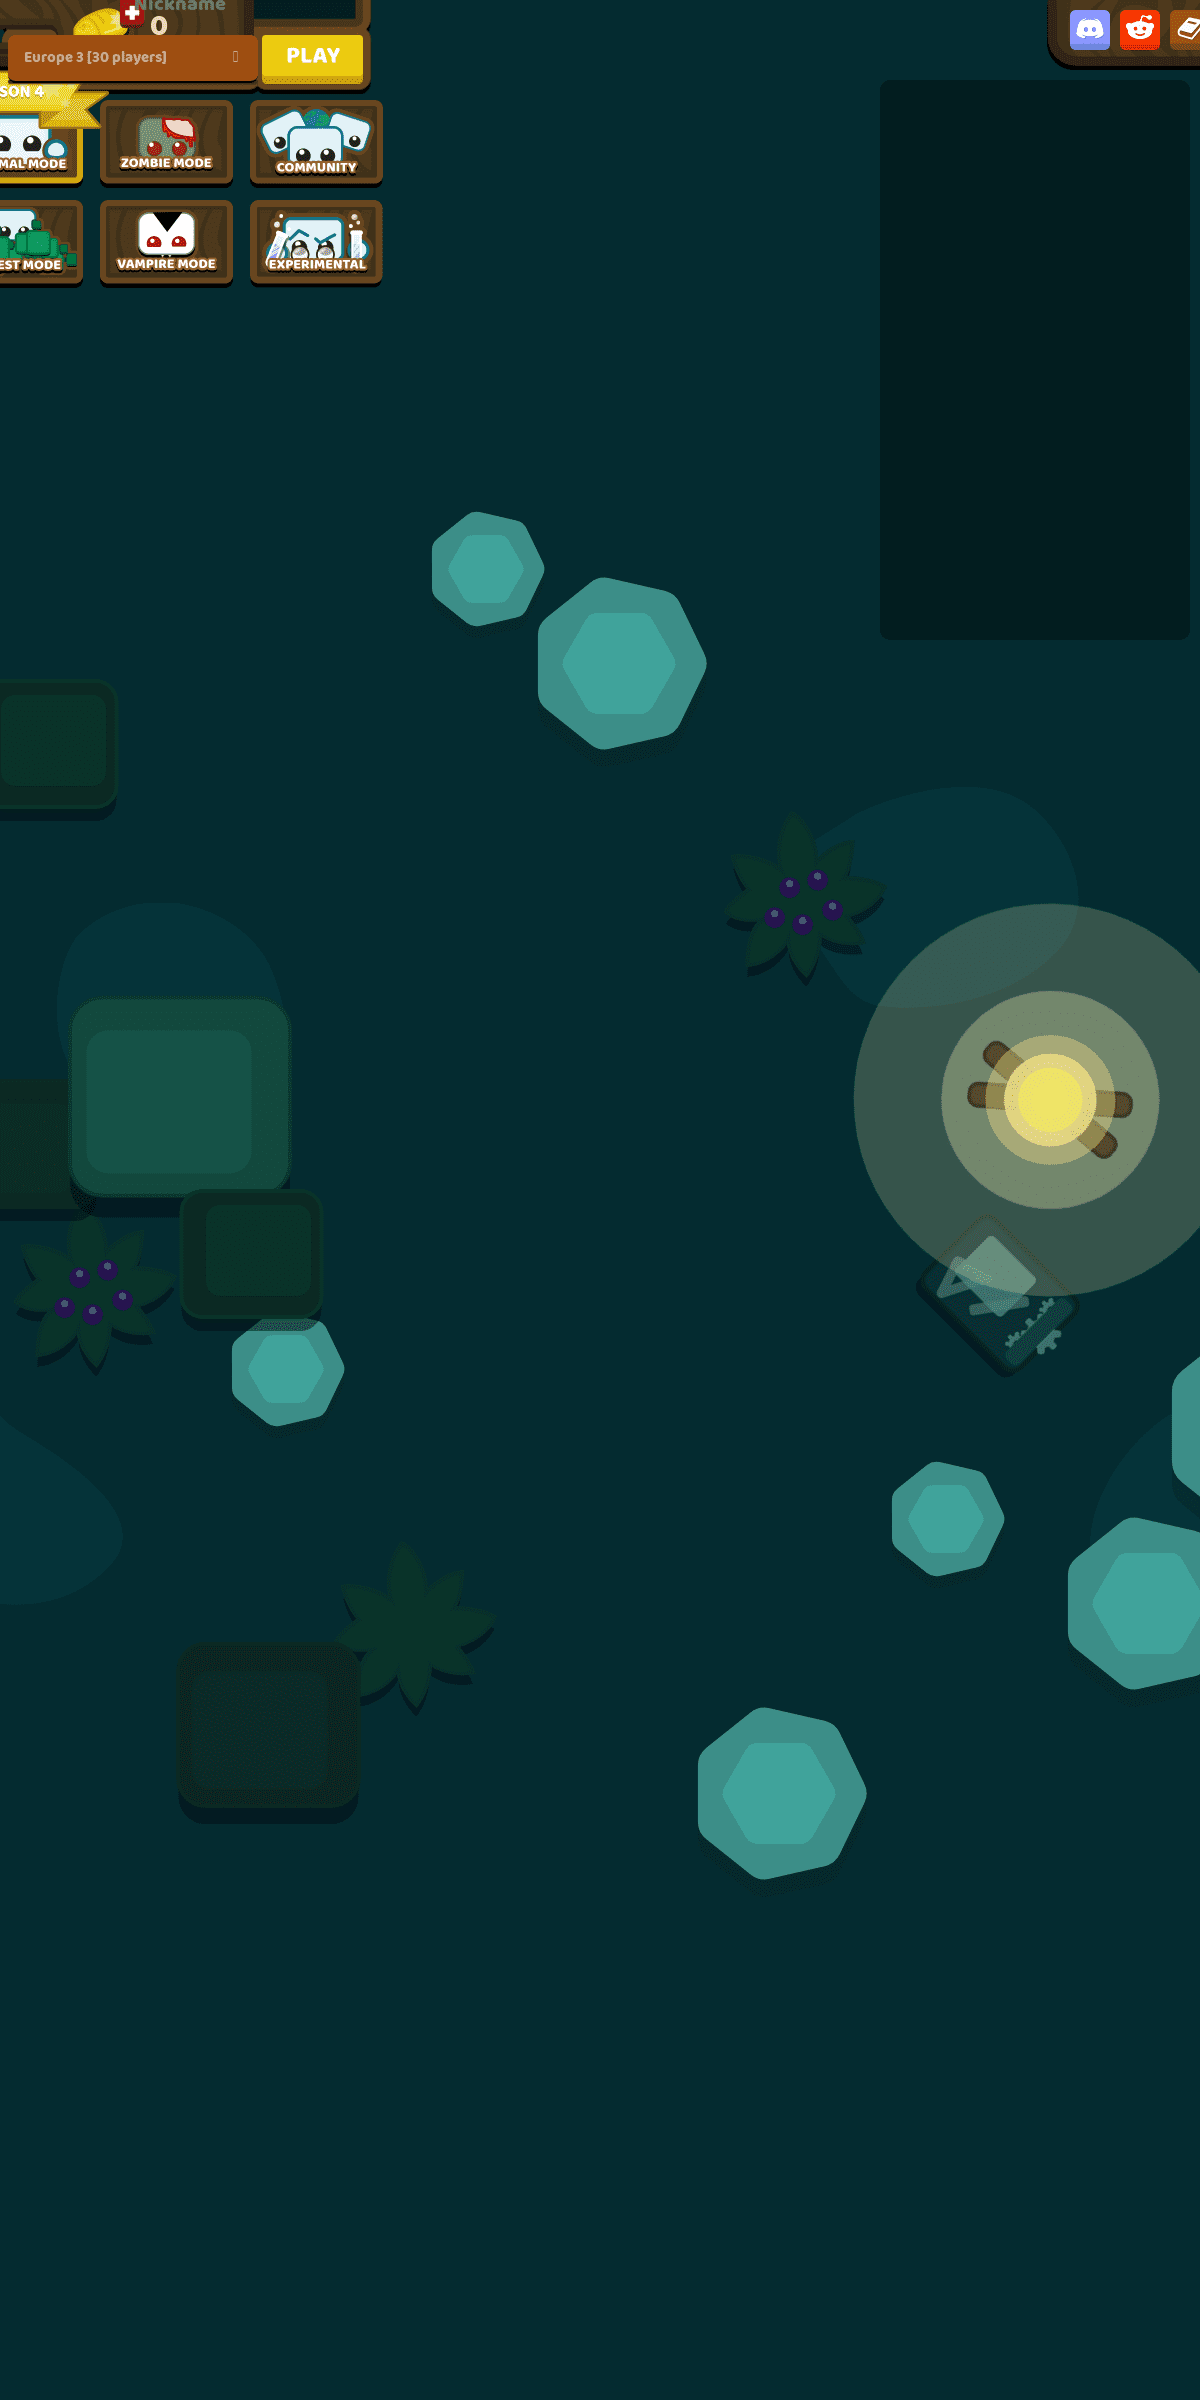 A complete backup of starve.io